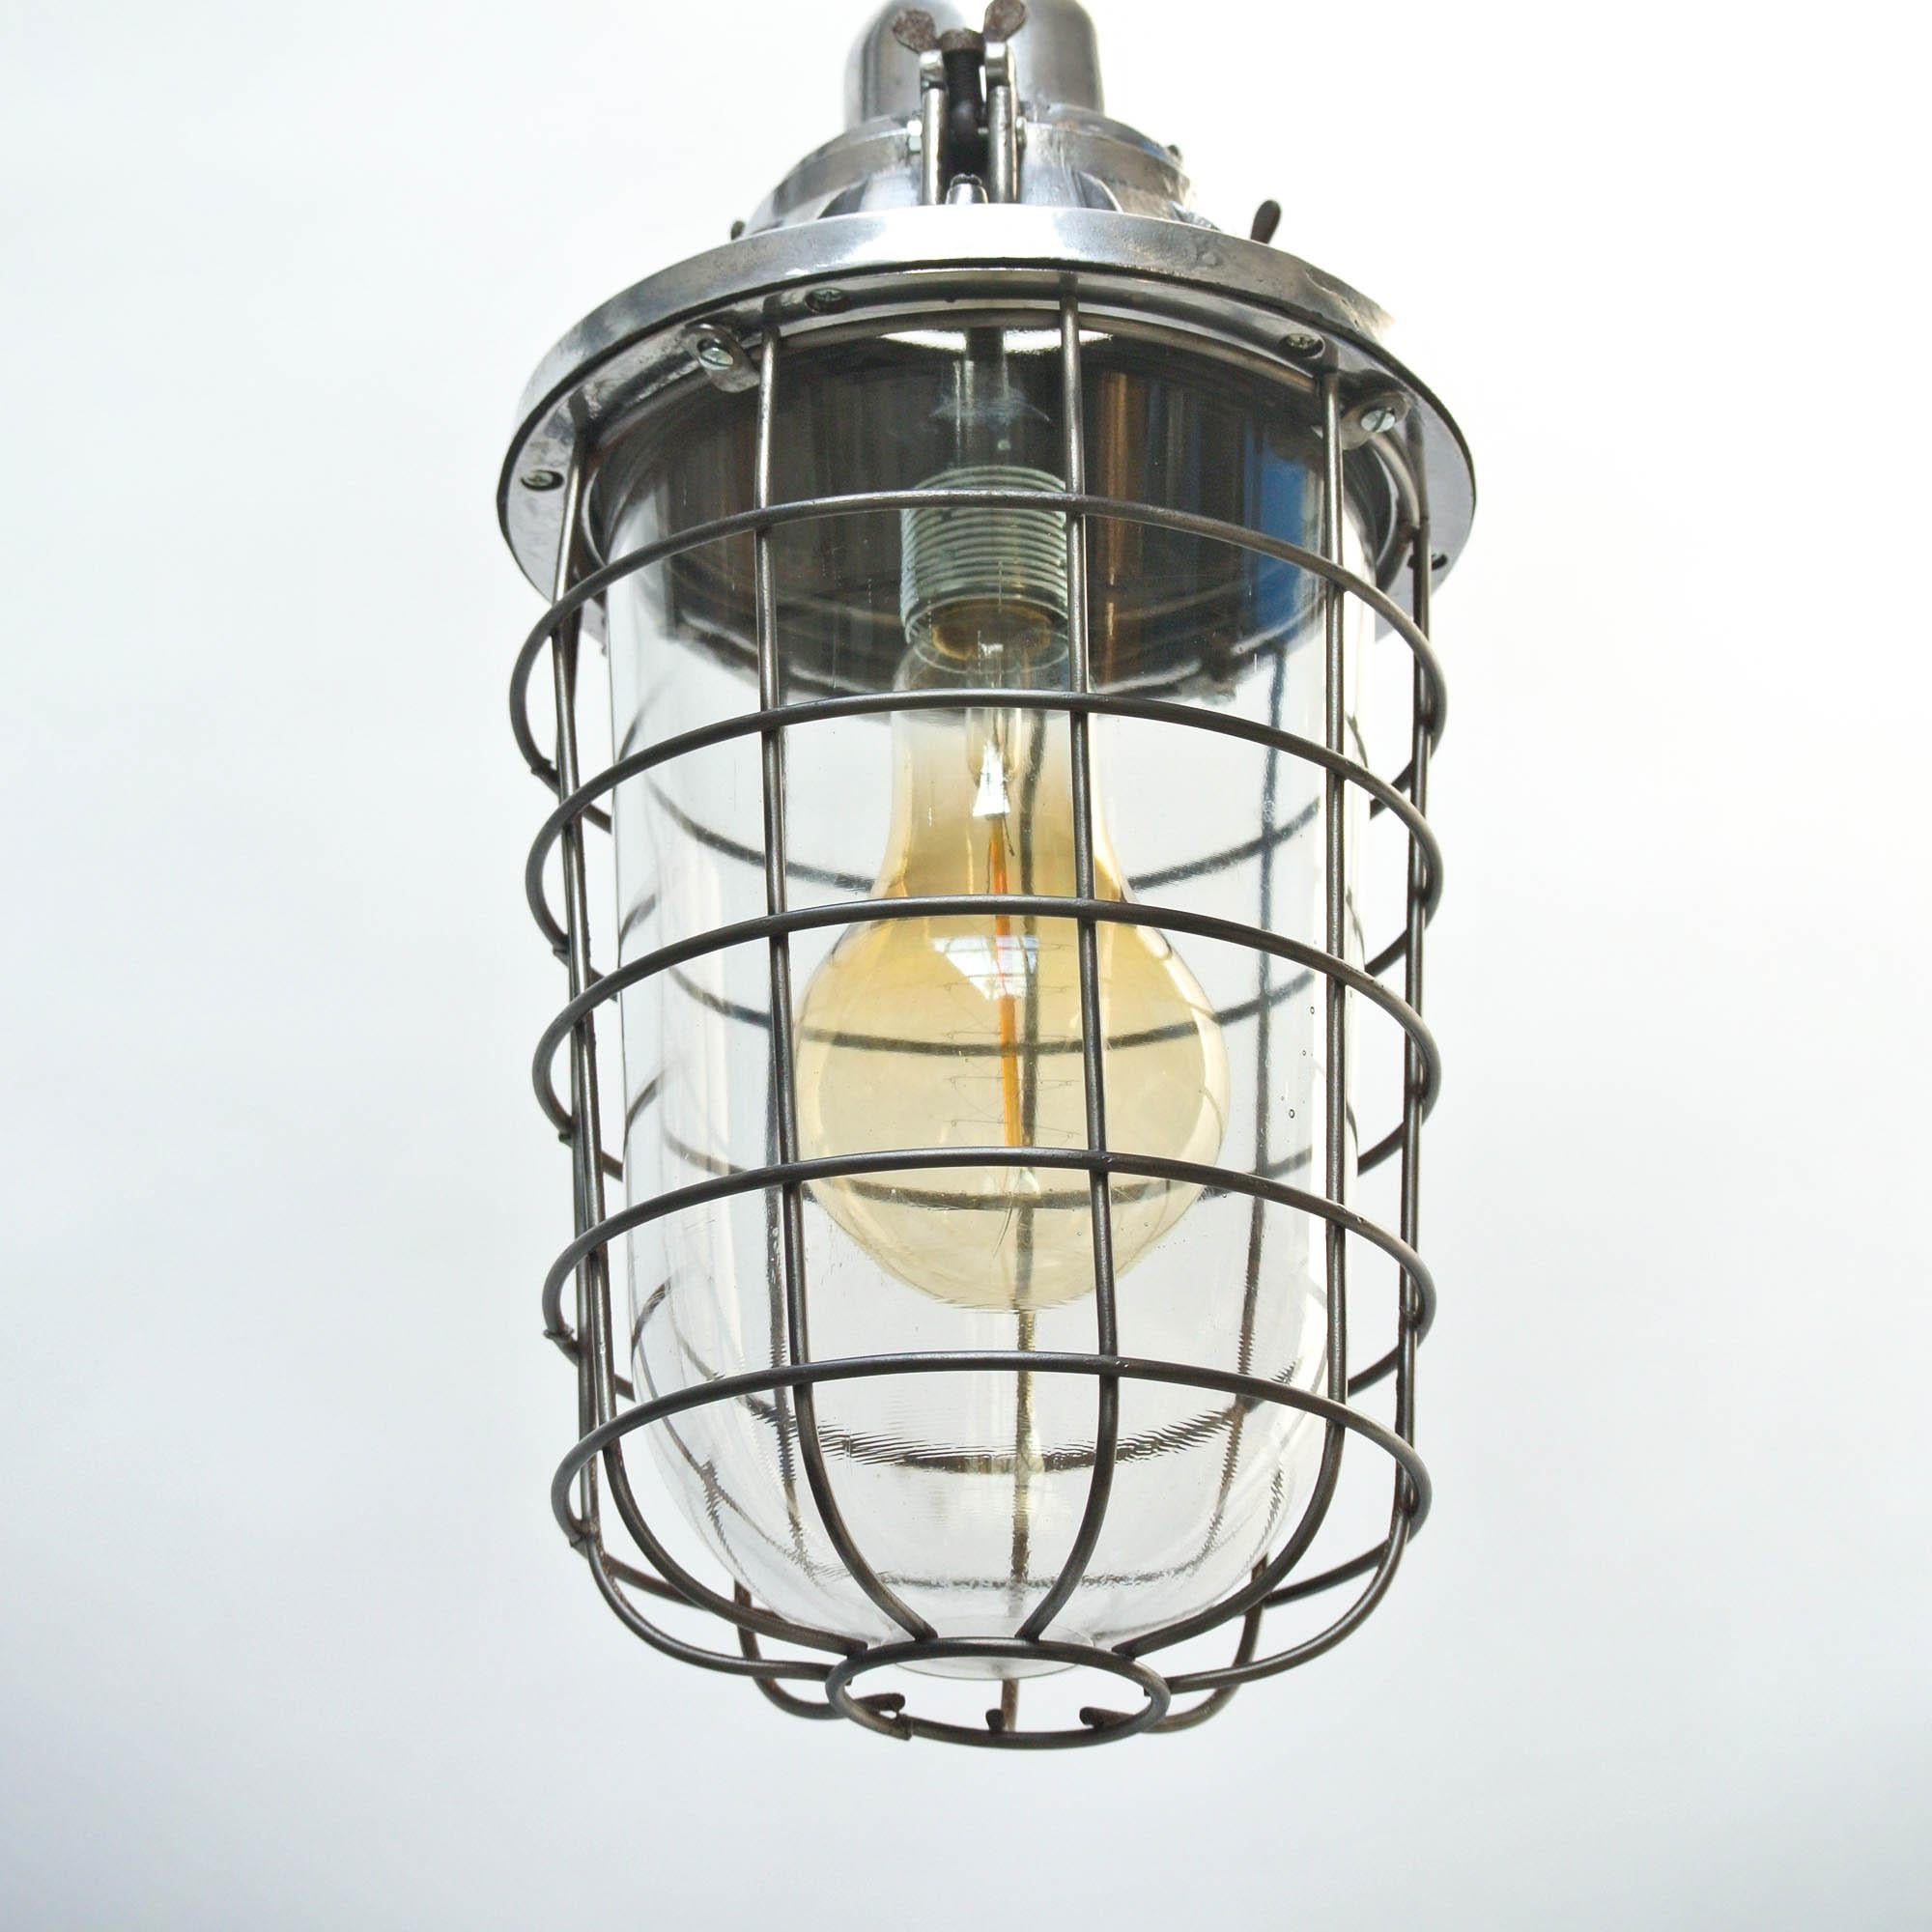 Polished Ceiling Lamp, Glass Globe with Squared Fence, circa 1950-1959, France